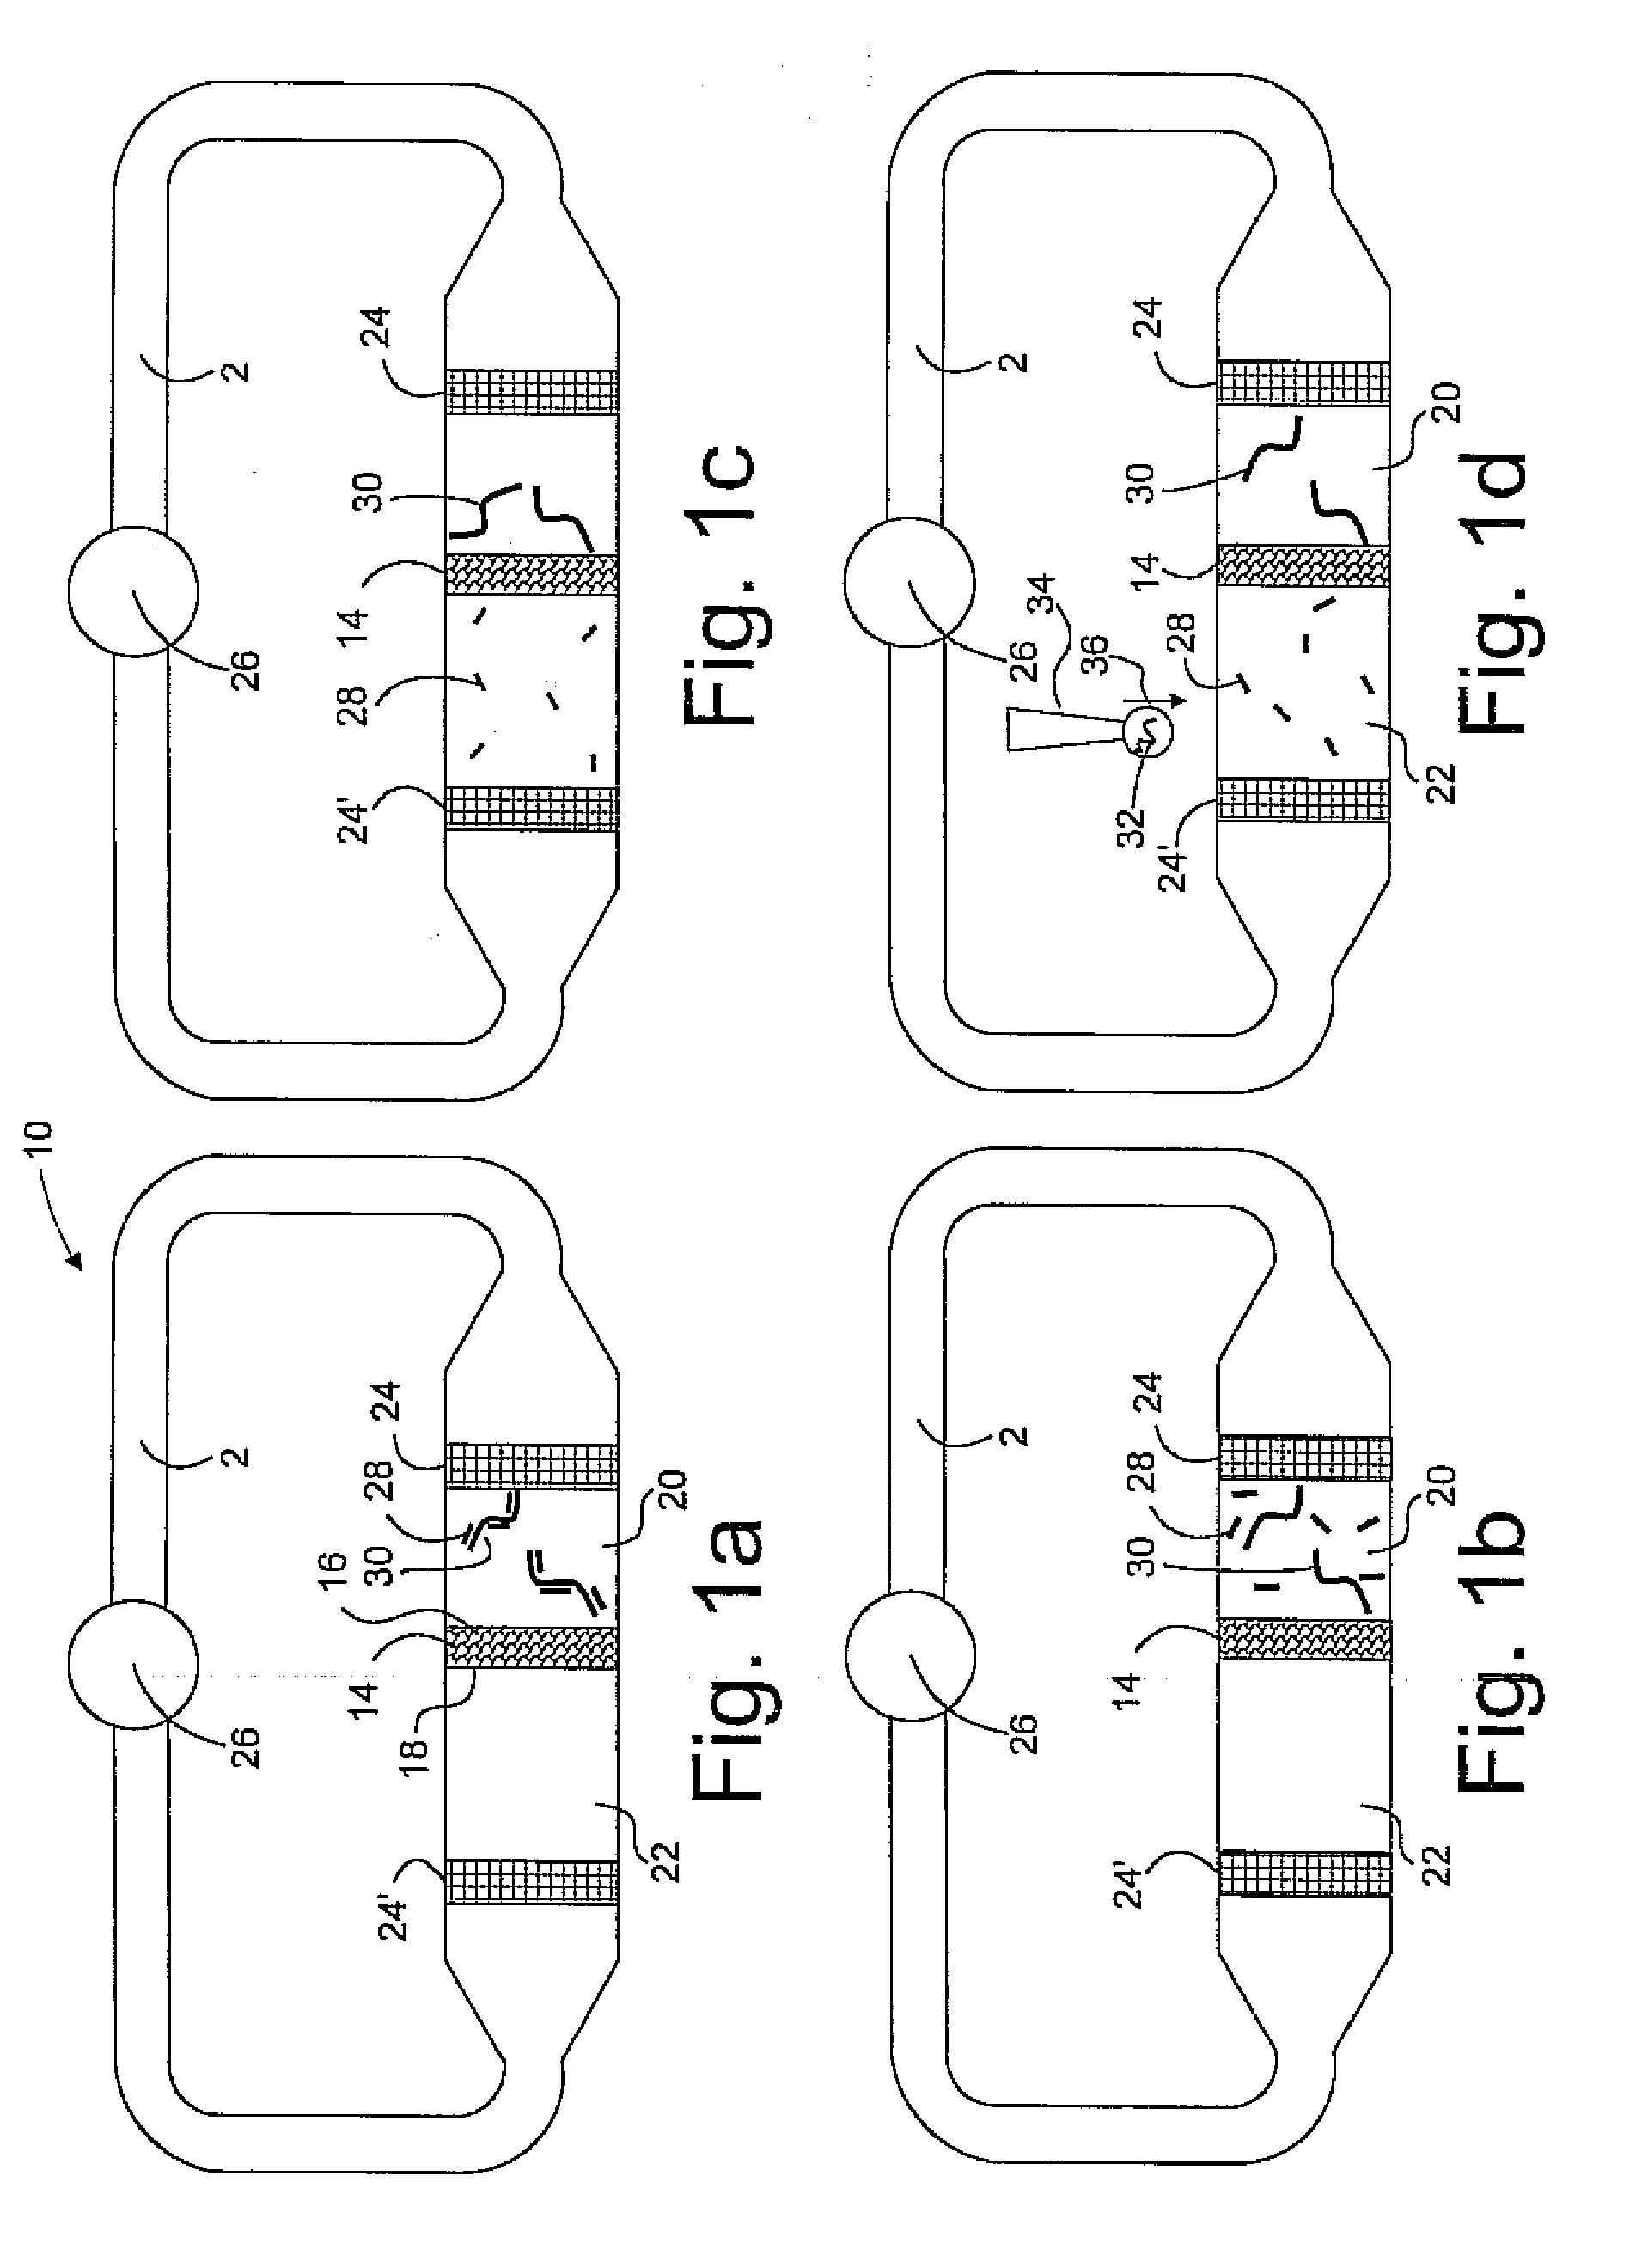 Nucleic acid array with releaseable nucleic acid probes